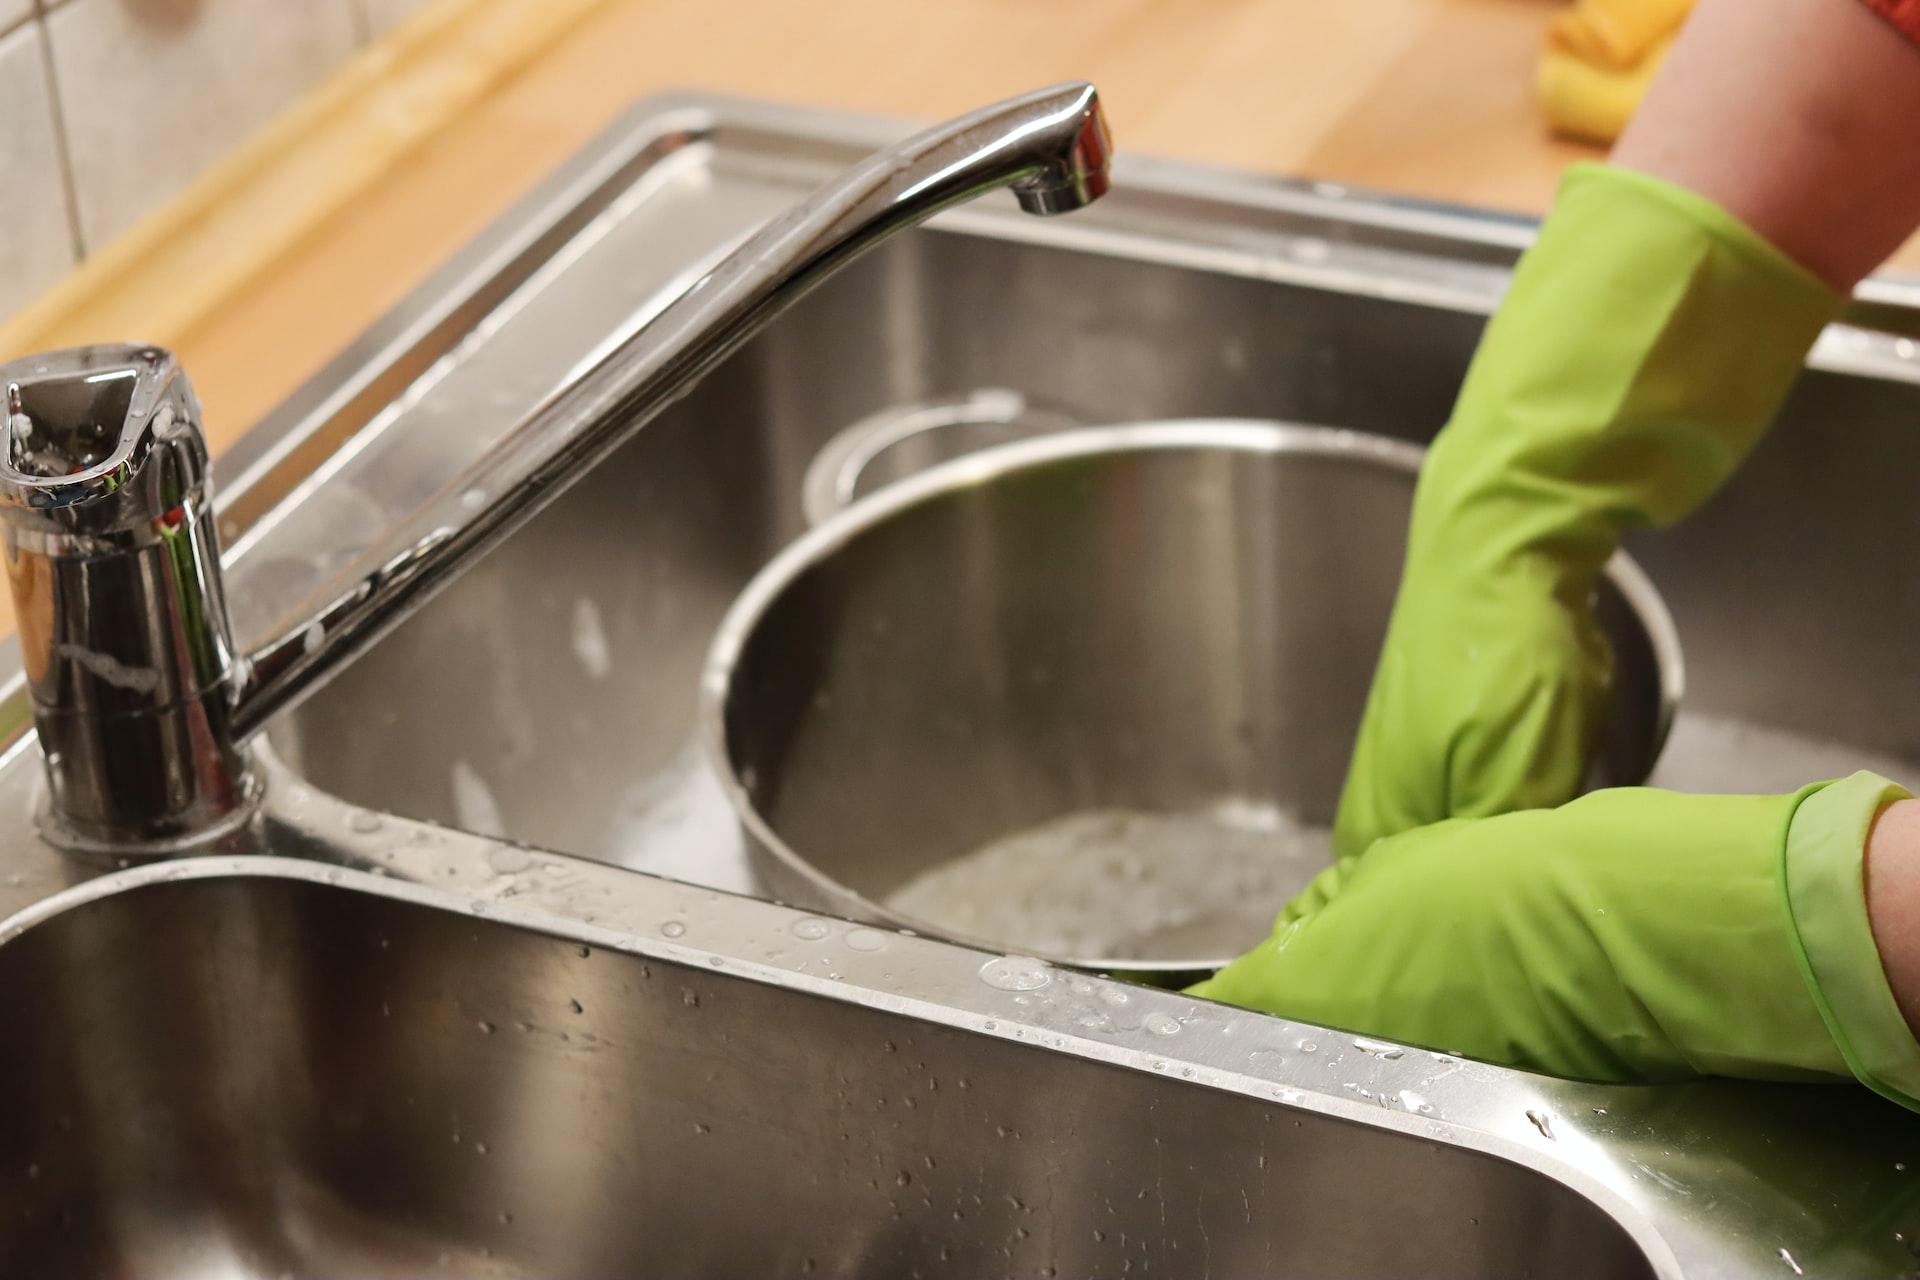 Person wearing green gloves and washing dishes